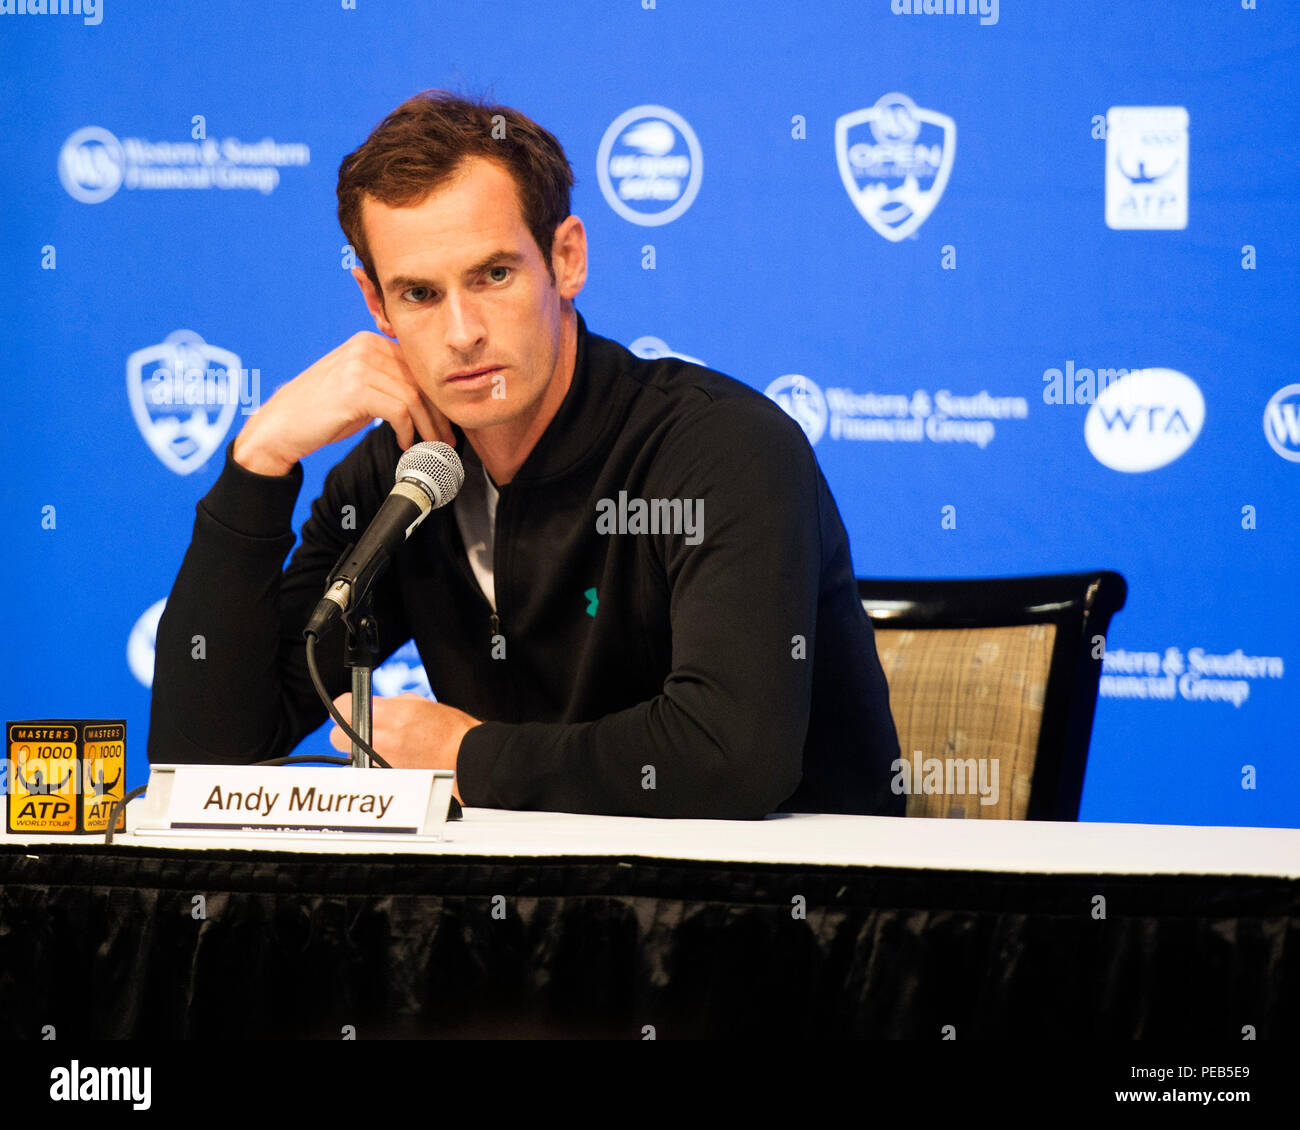 Mason, Ohio, USA. August 13, 2018: Andy Murray (GBR) addresses the press after his loss to Lucas Pouille (FRA) at the Western Southern Open in Brent Clark/Alamy Live News Stock Photo